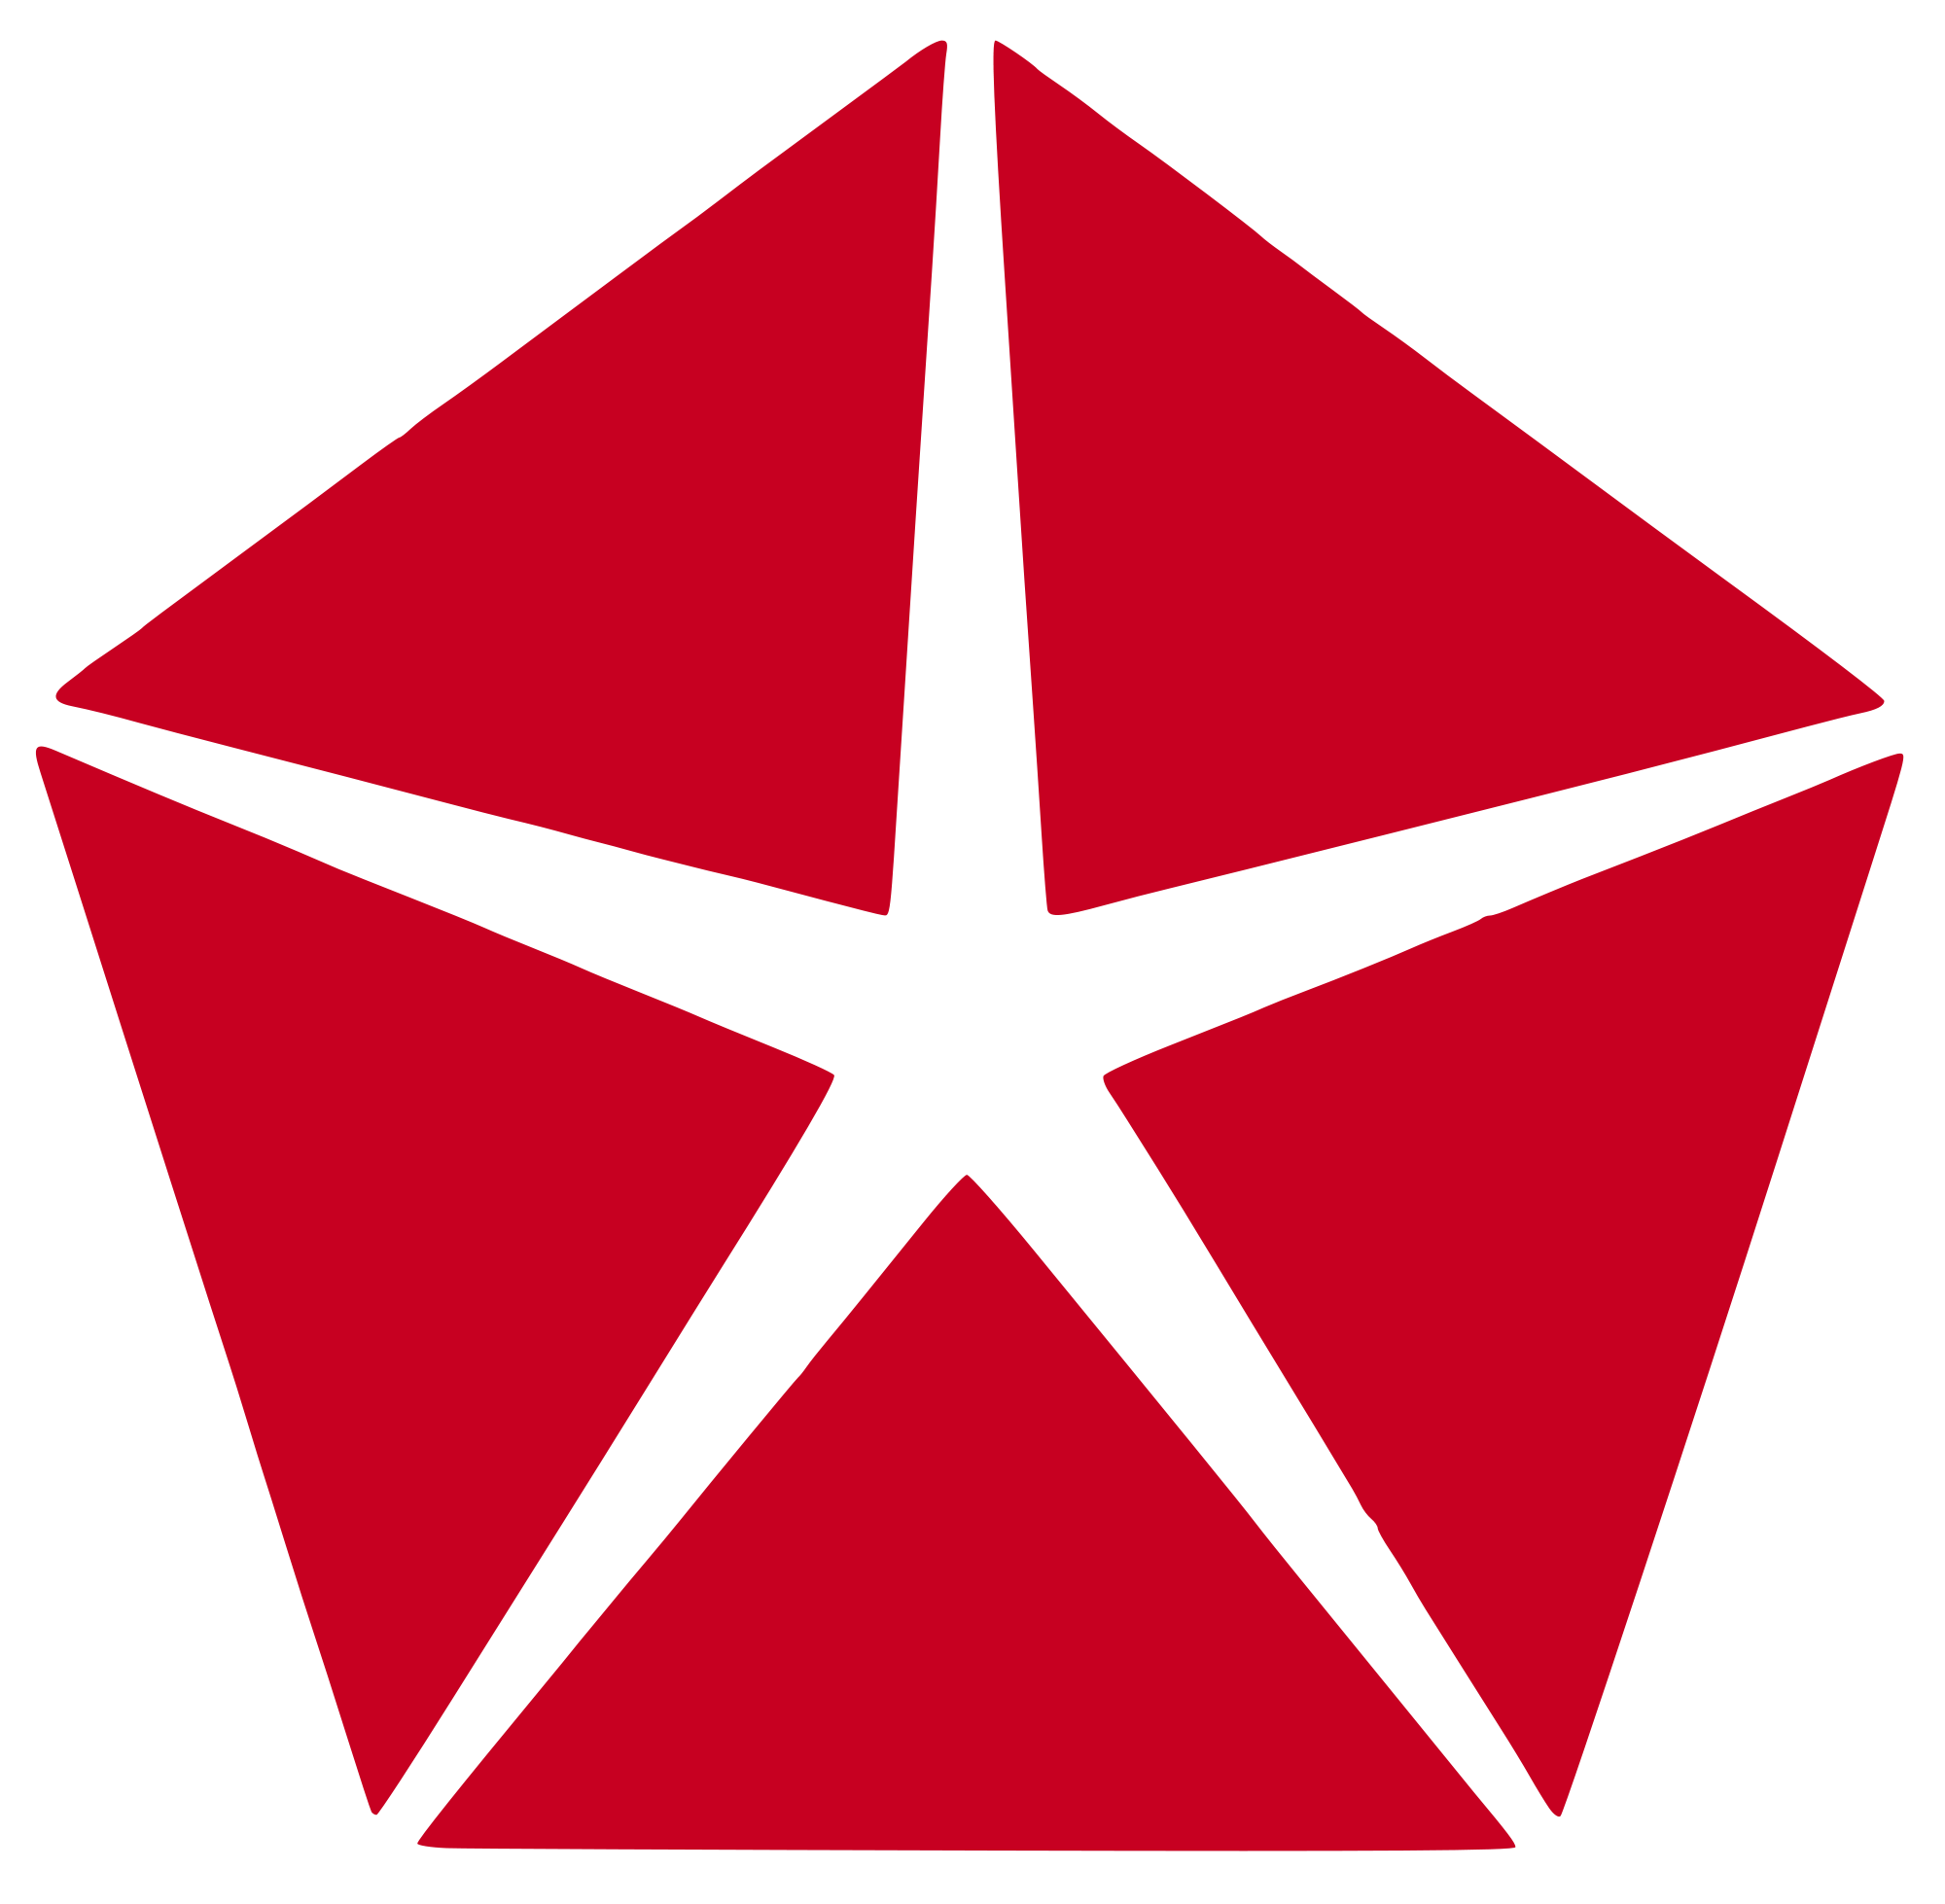 White and Red Star Logo - File:Dodge Red Pentastar.svg - Wikimedia Commons